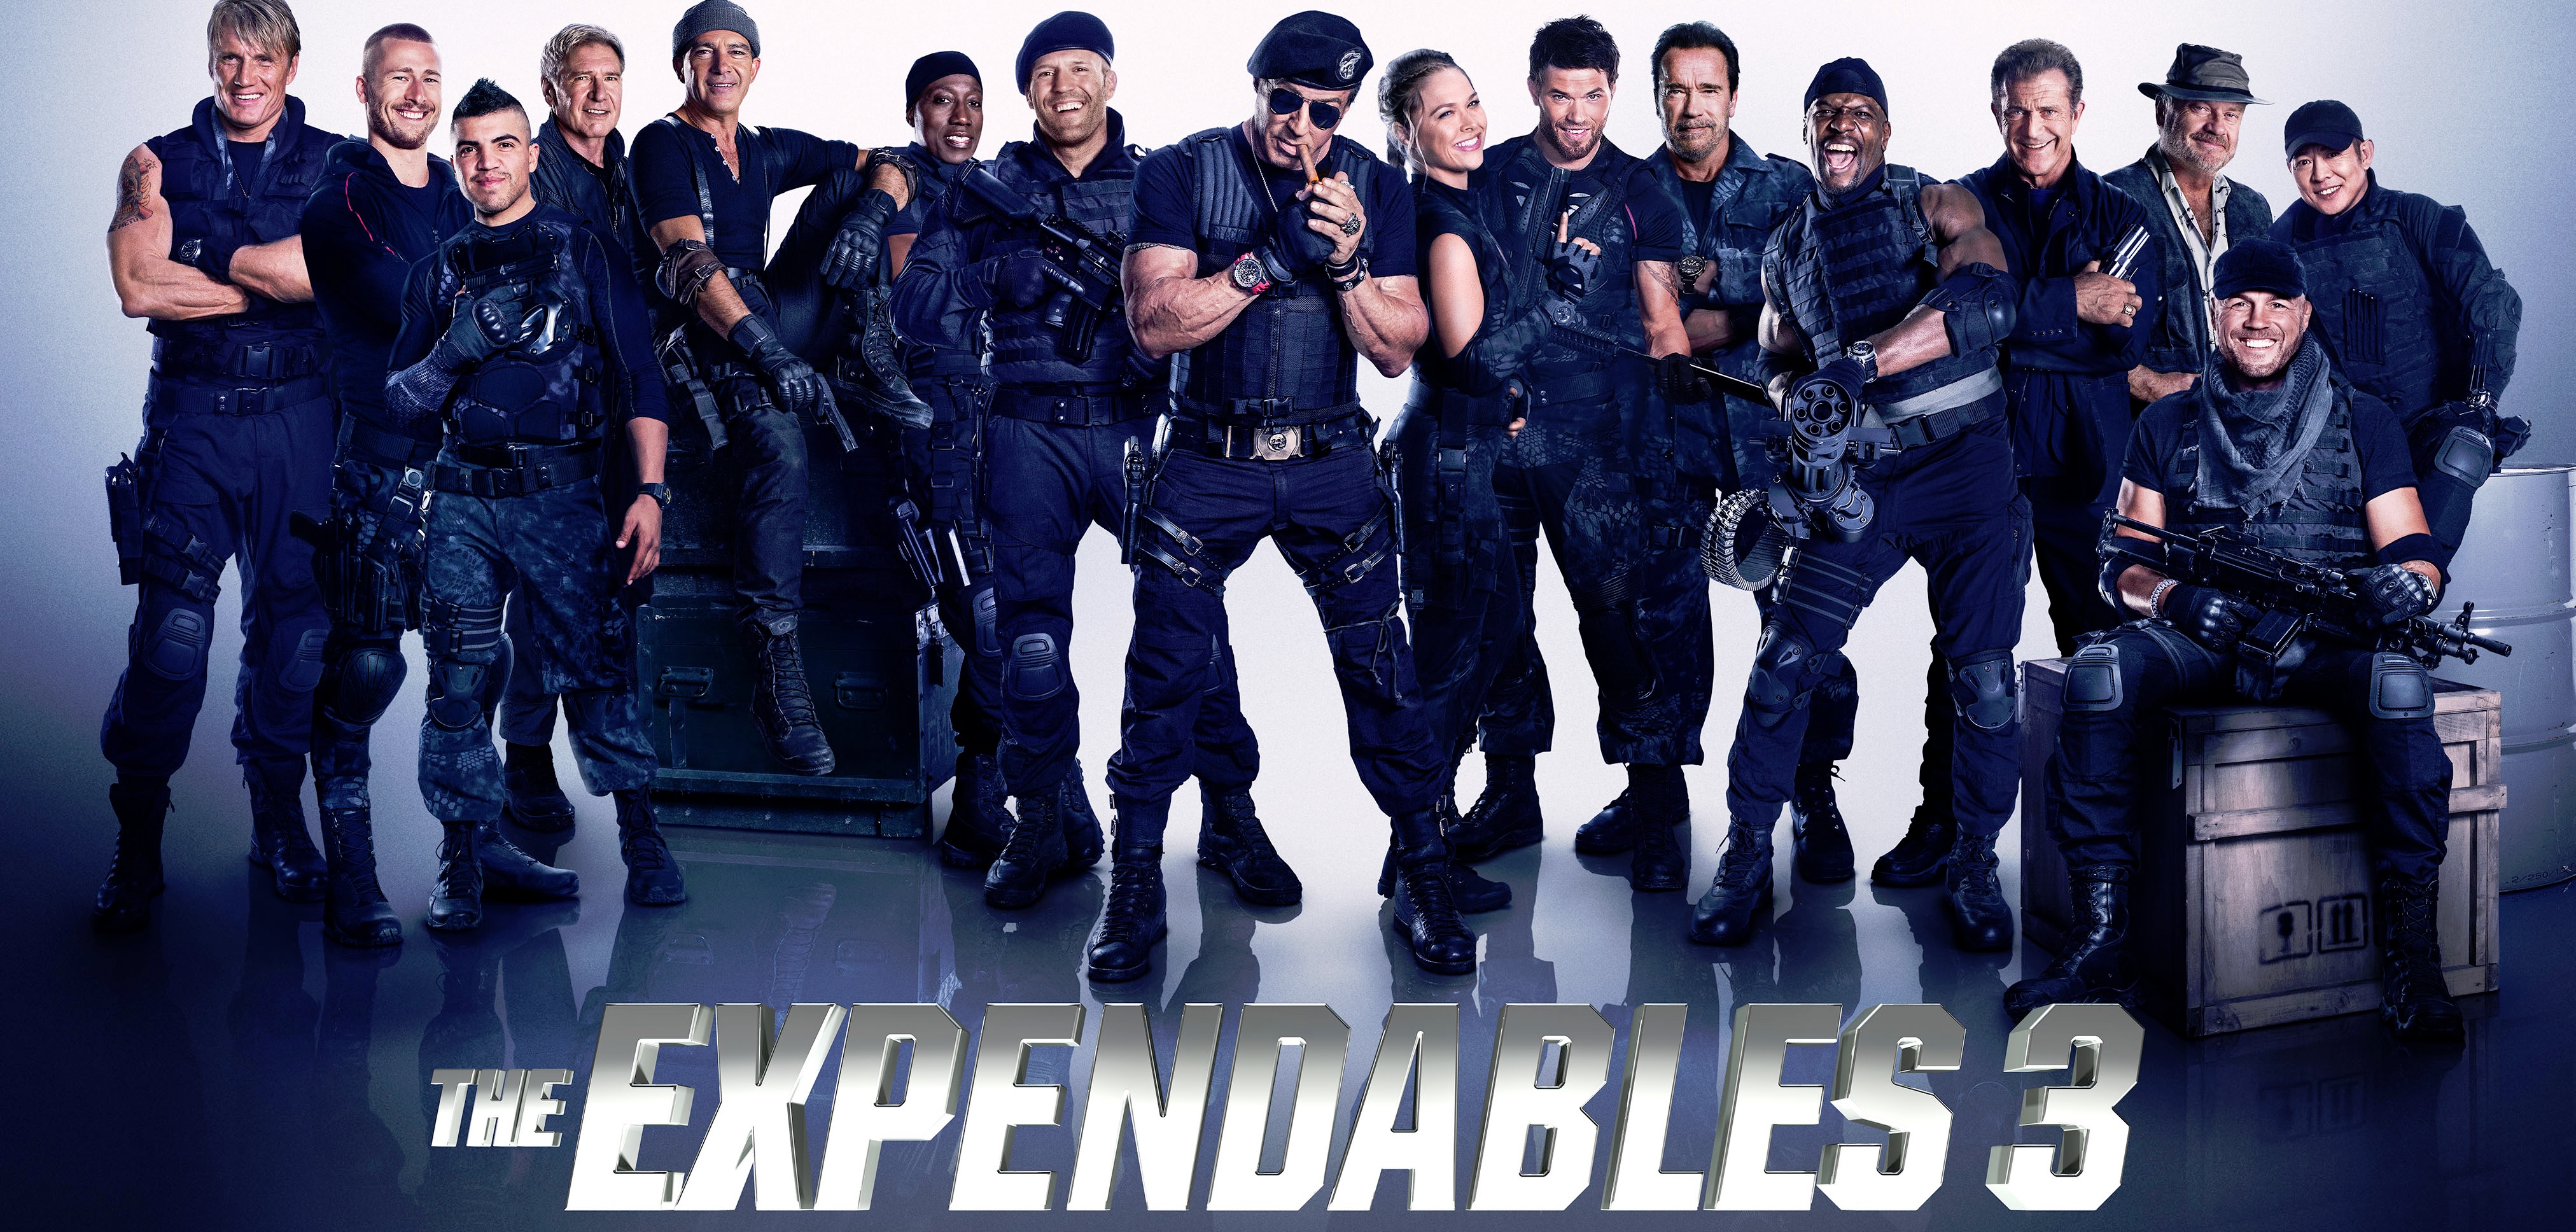 The Expendables 3 HD wallpapers, Desktop wallpaper - most viewed